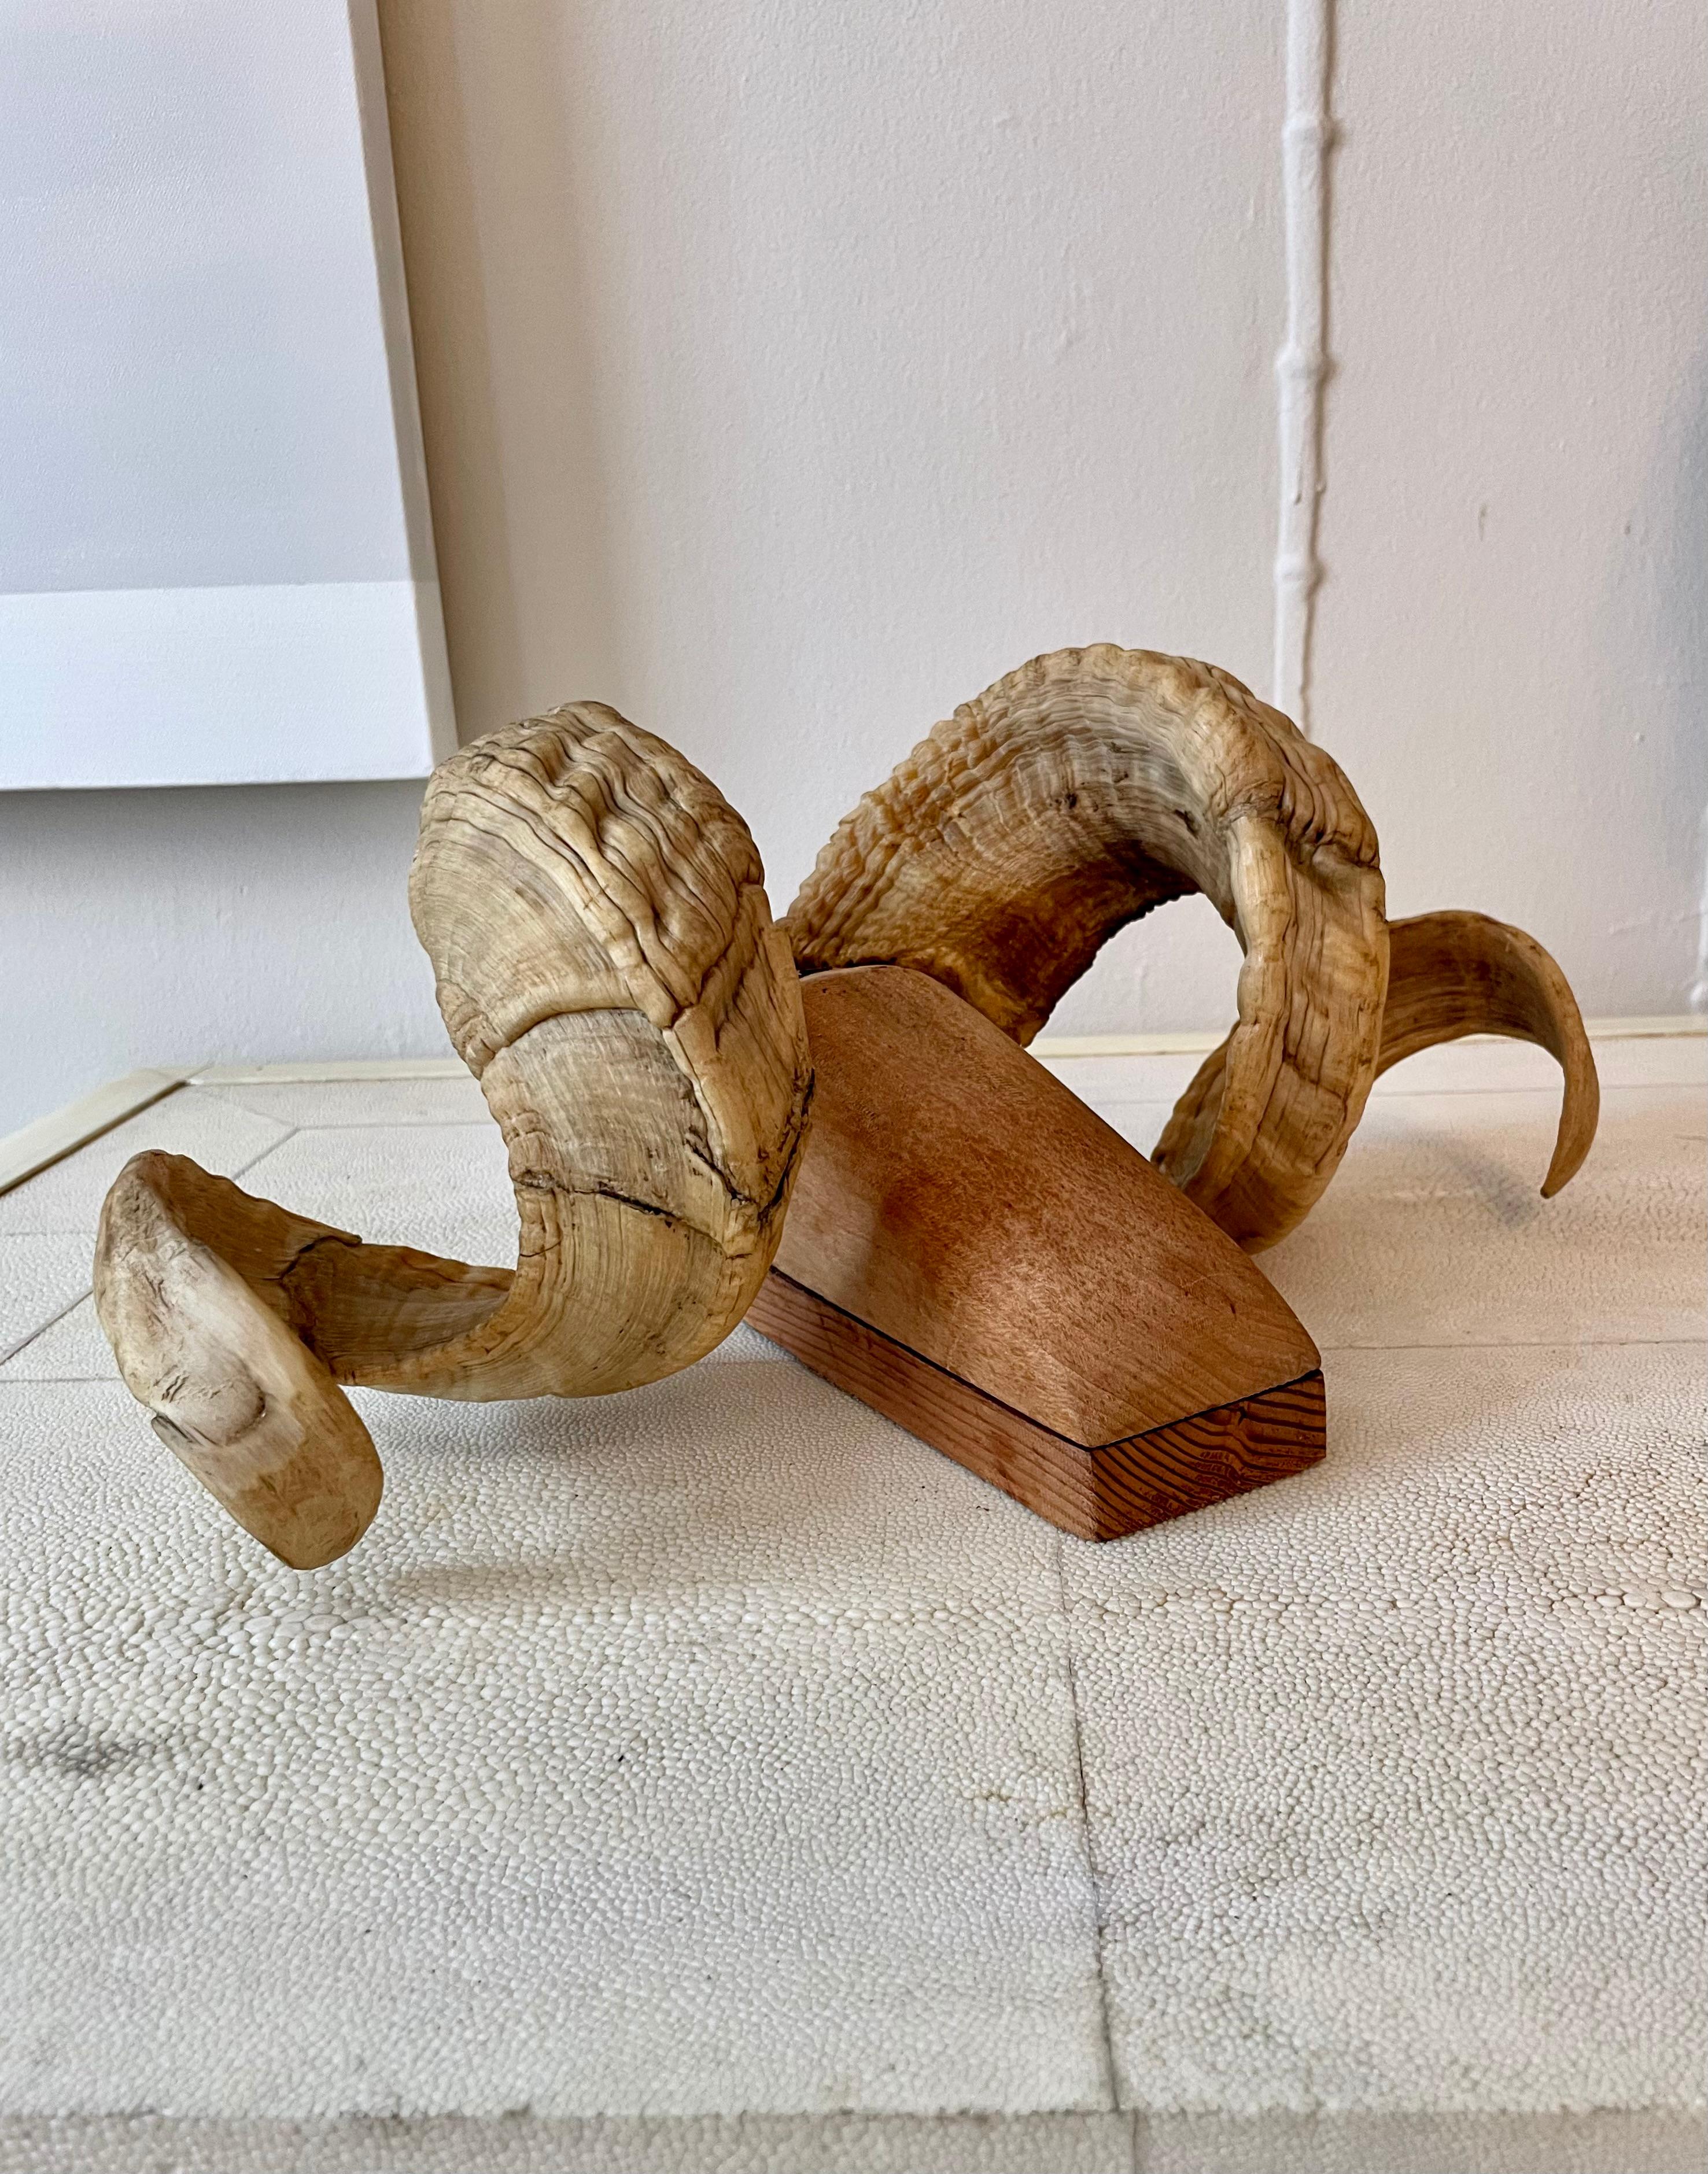 Wonderful mounted ram's horn wall-hanging. A nice alternative to the skull look - these horns have been mounted to a shaped piece of wood. This brings an overall softness to the piece, and some character. 

Easily hangs from any nail or screw. Not